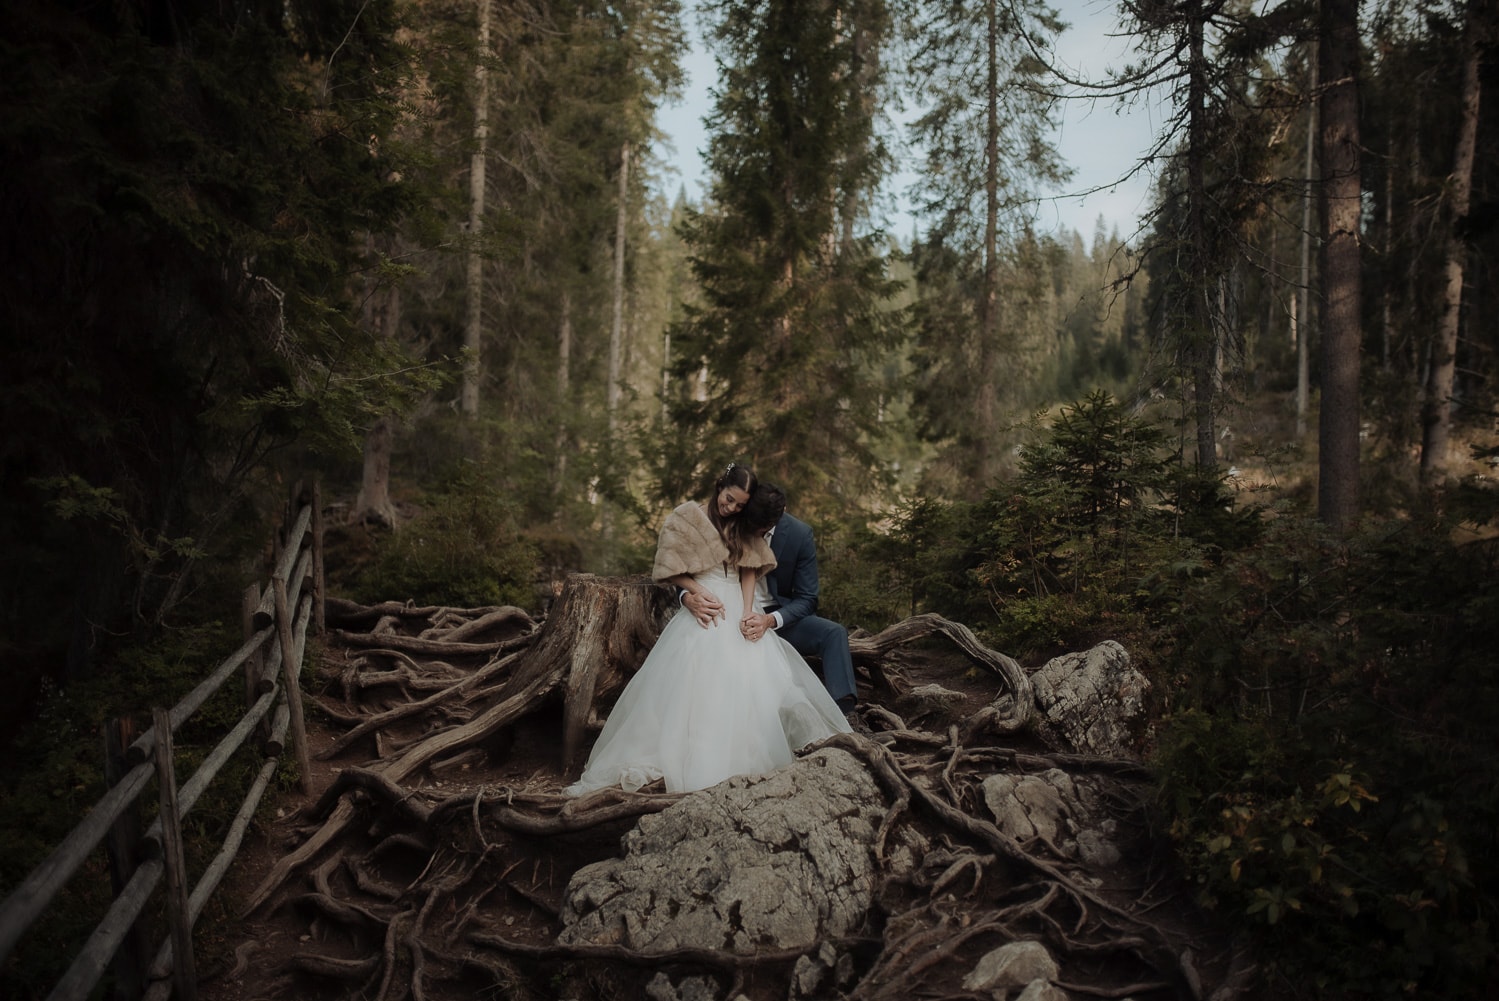 Groom huggin bride in the forest in the Dolomites during Italy Elopement